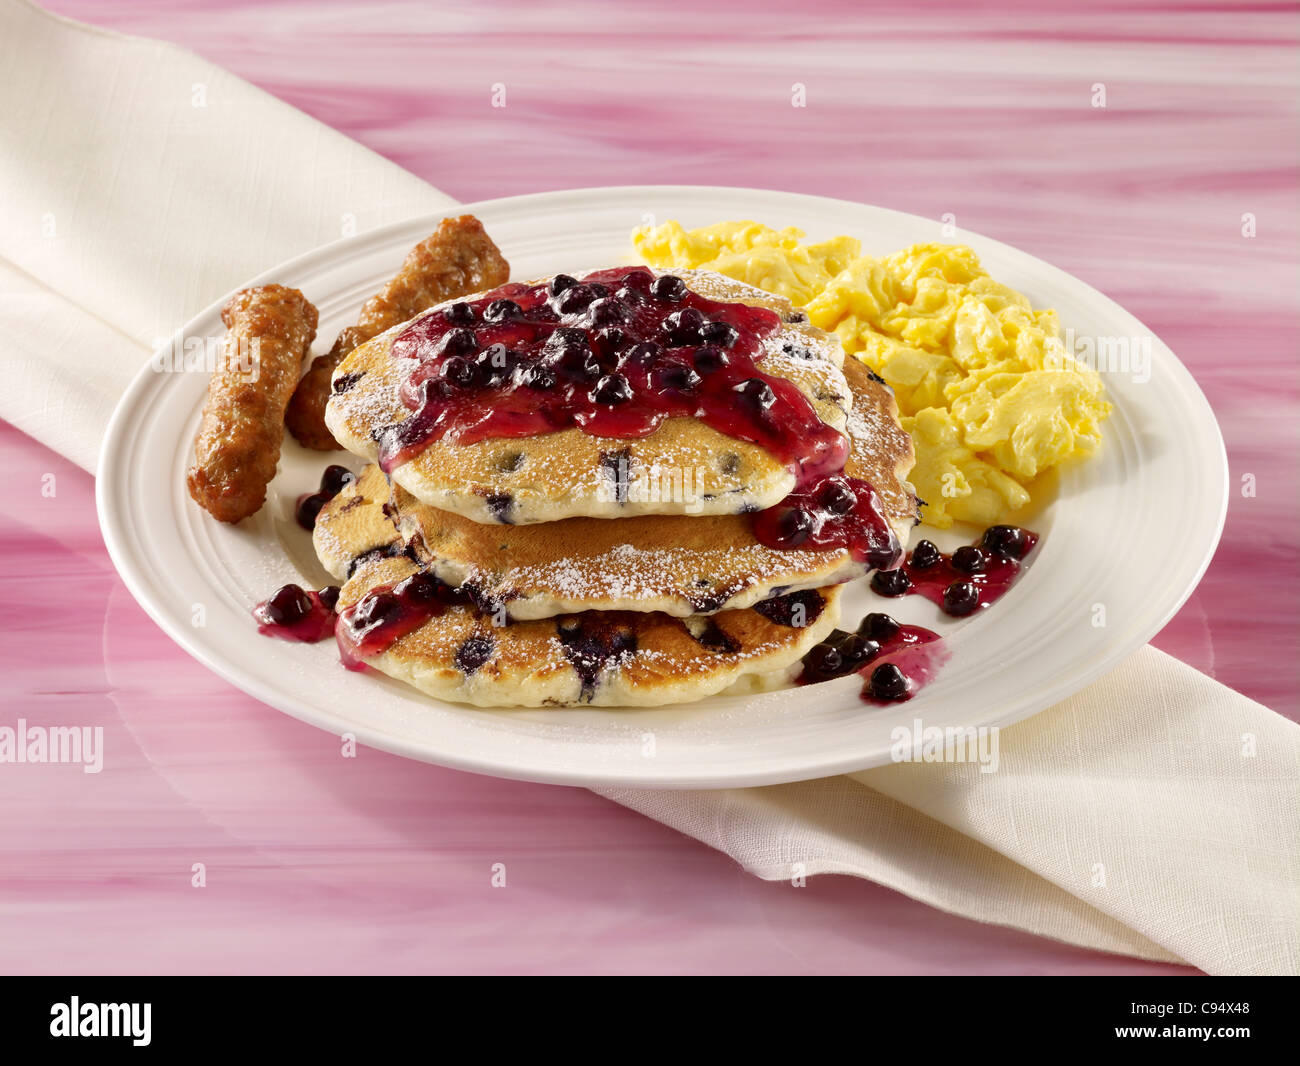 https://c8.alamy.com/comp/C94X48/blueberry-pancakes-with-eggs-and-sausage-C94X48.jpg